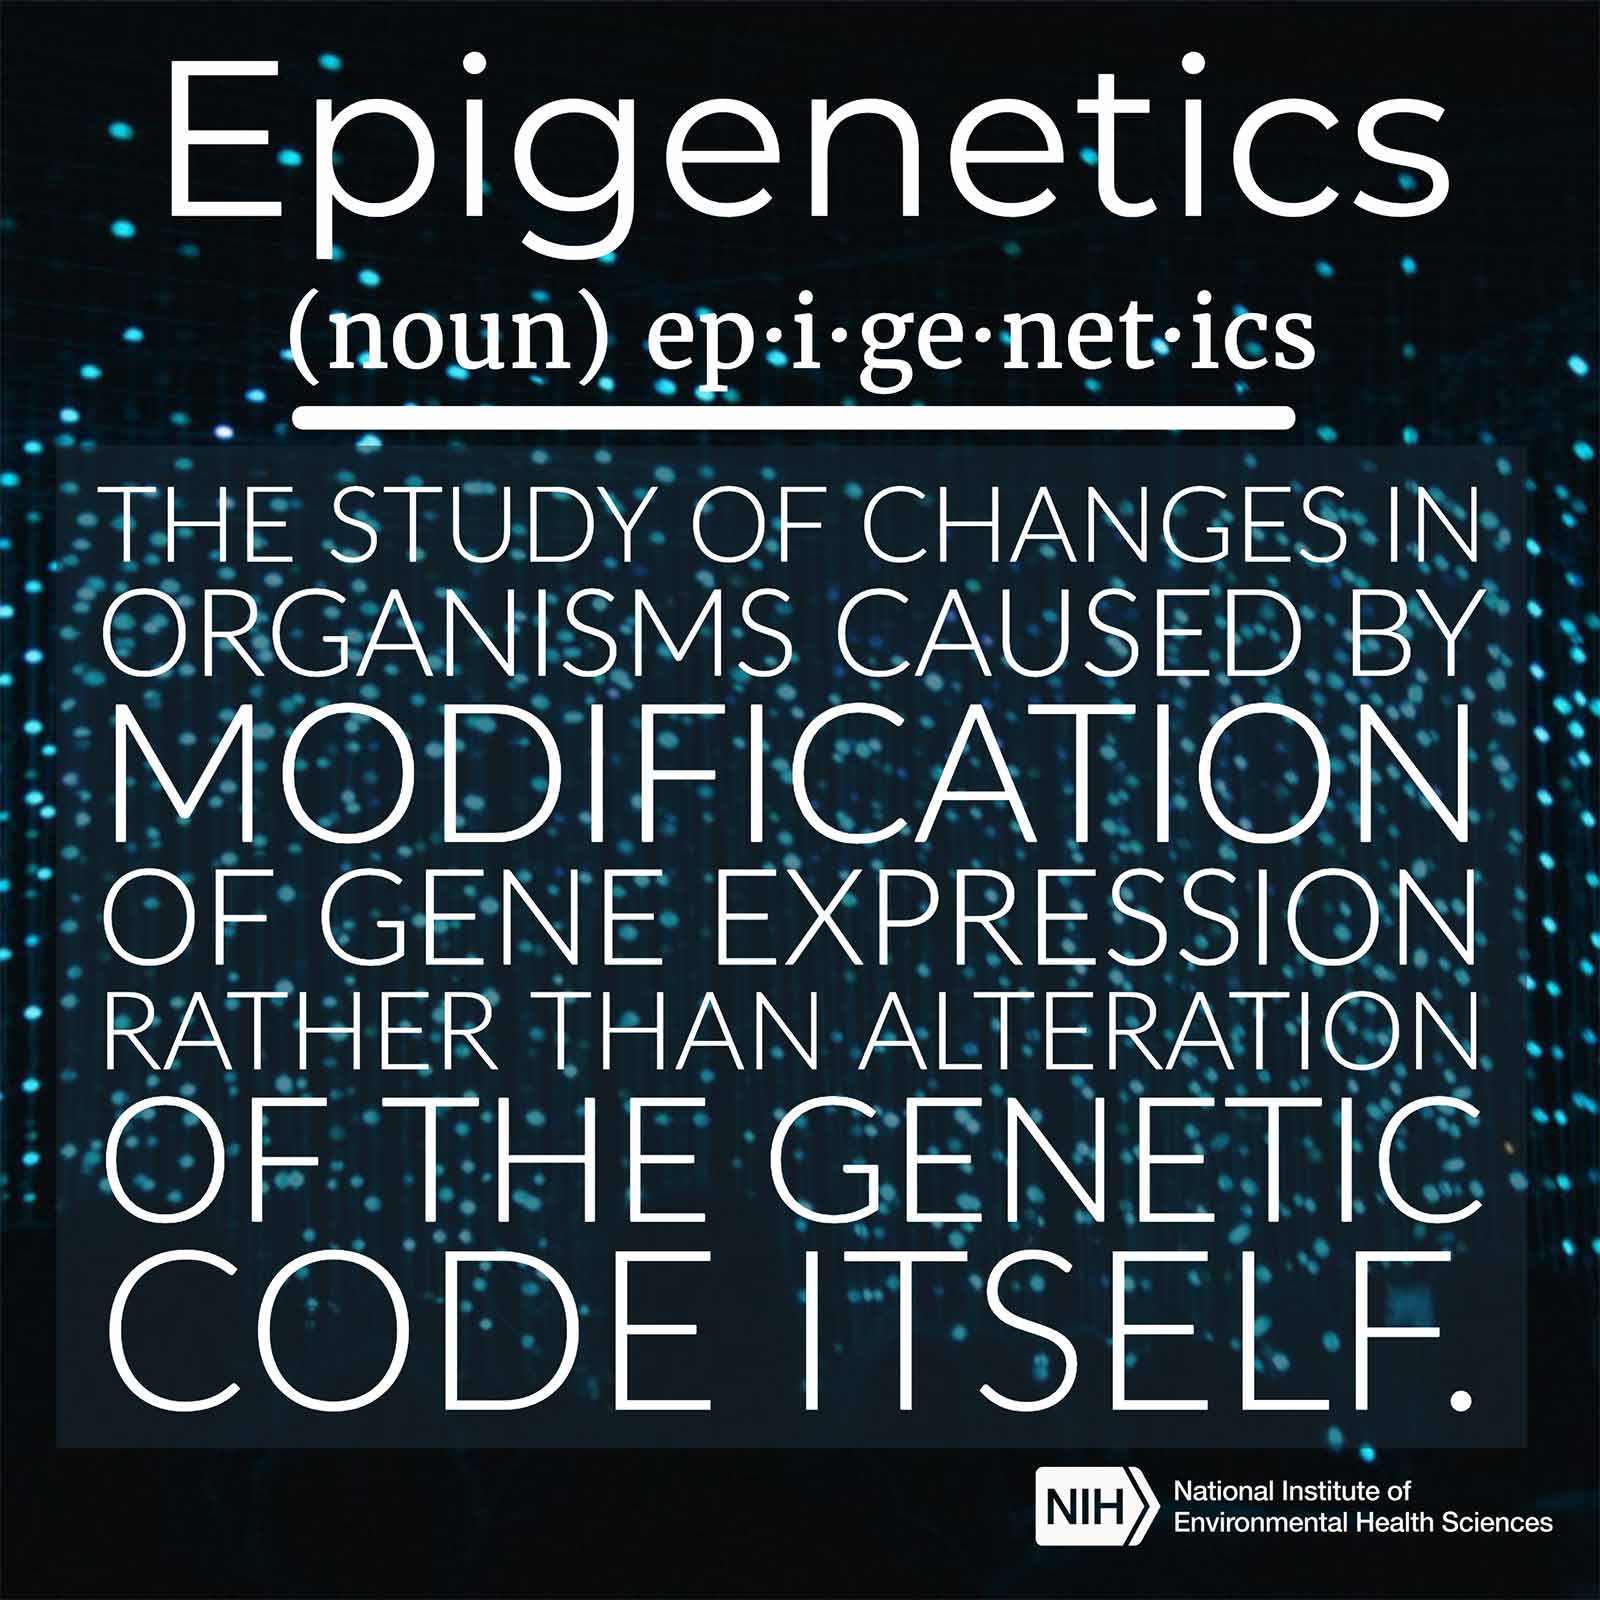 Epigenetics (noun) described as the study of changes in organisms caused by modification of gene expression rather than alteration of the genetic code itself.